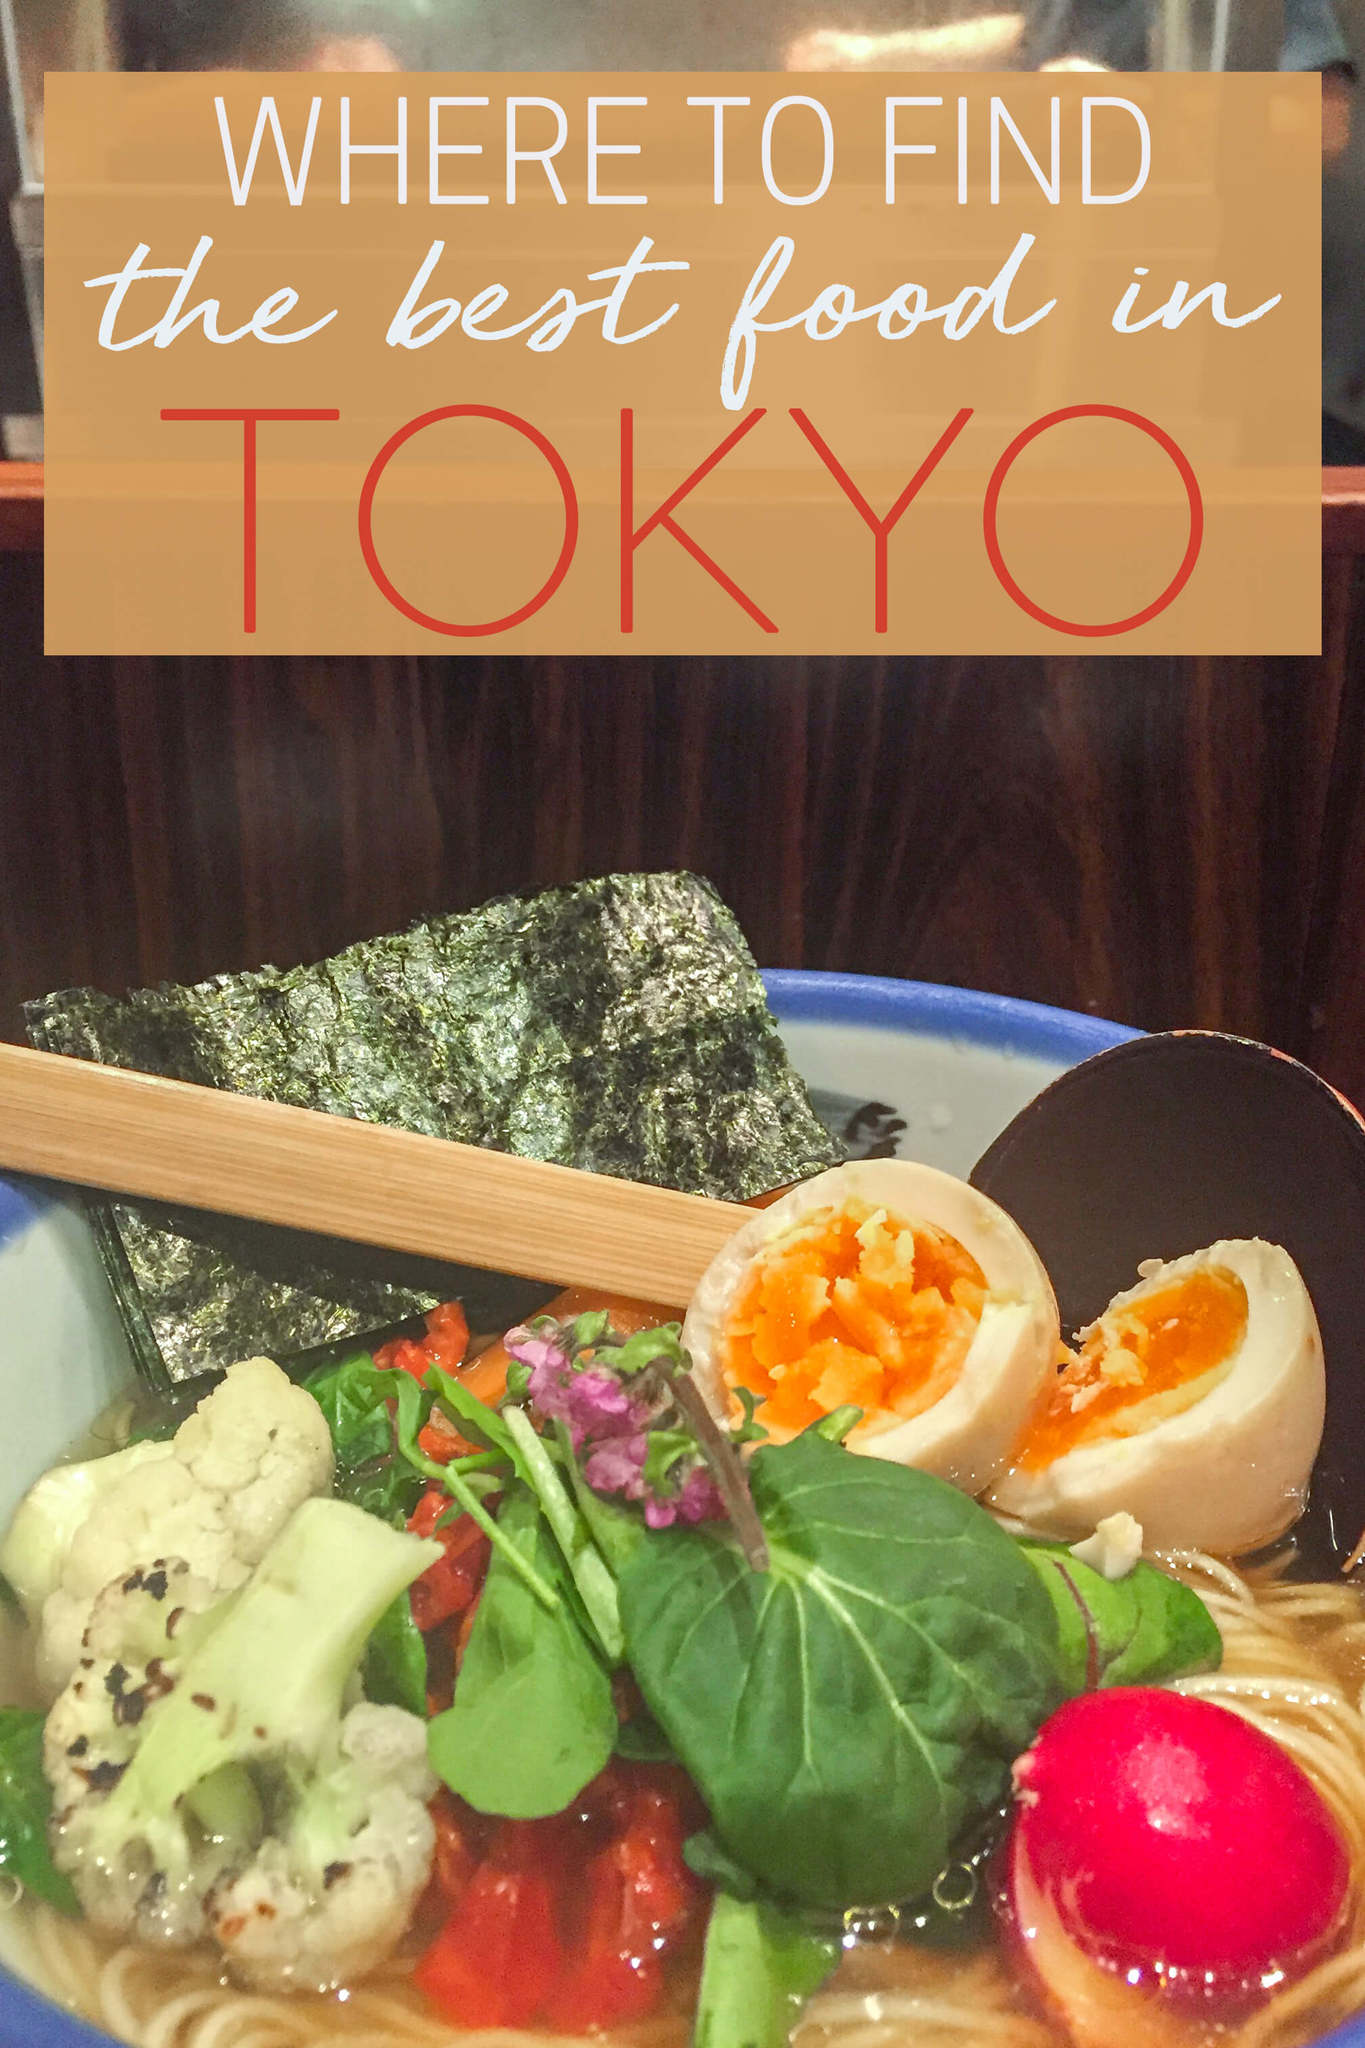 Where to Find the Best Food in Tokyo